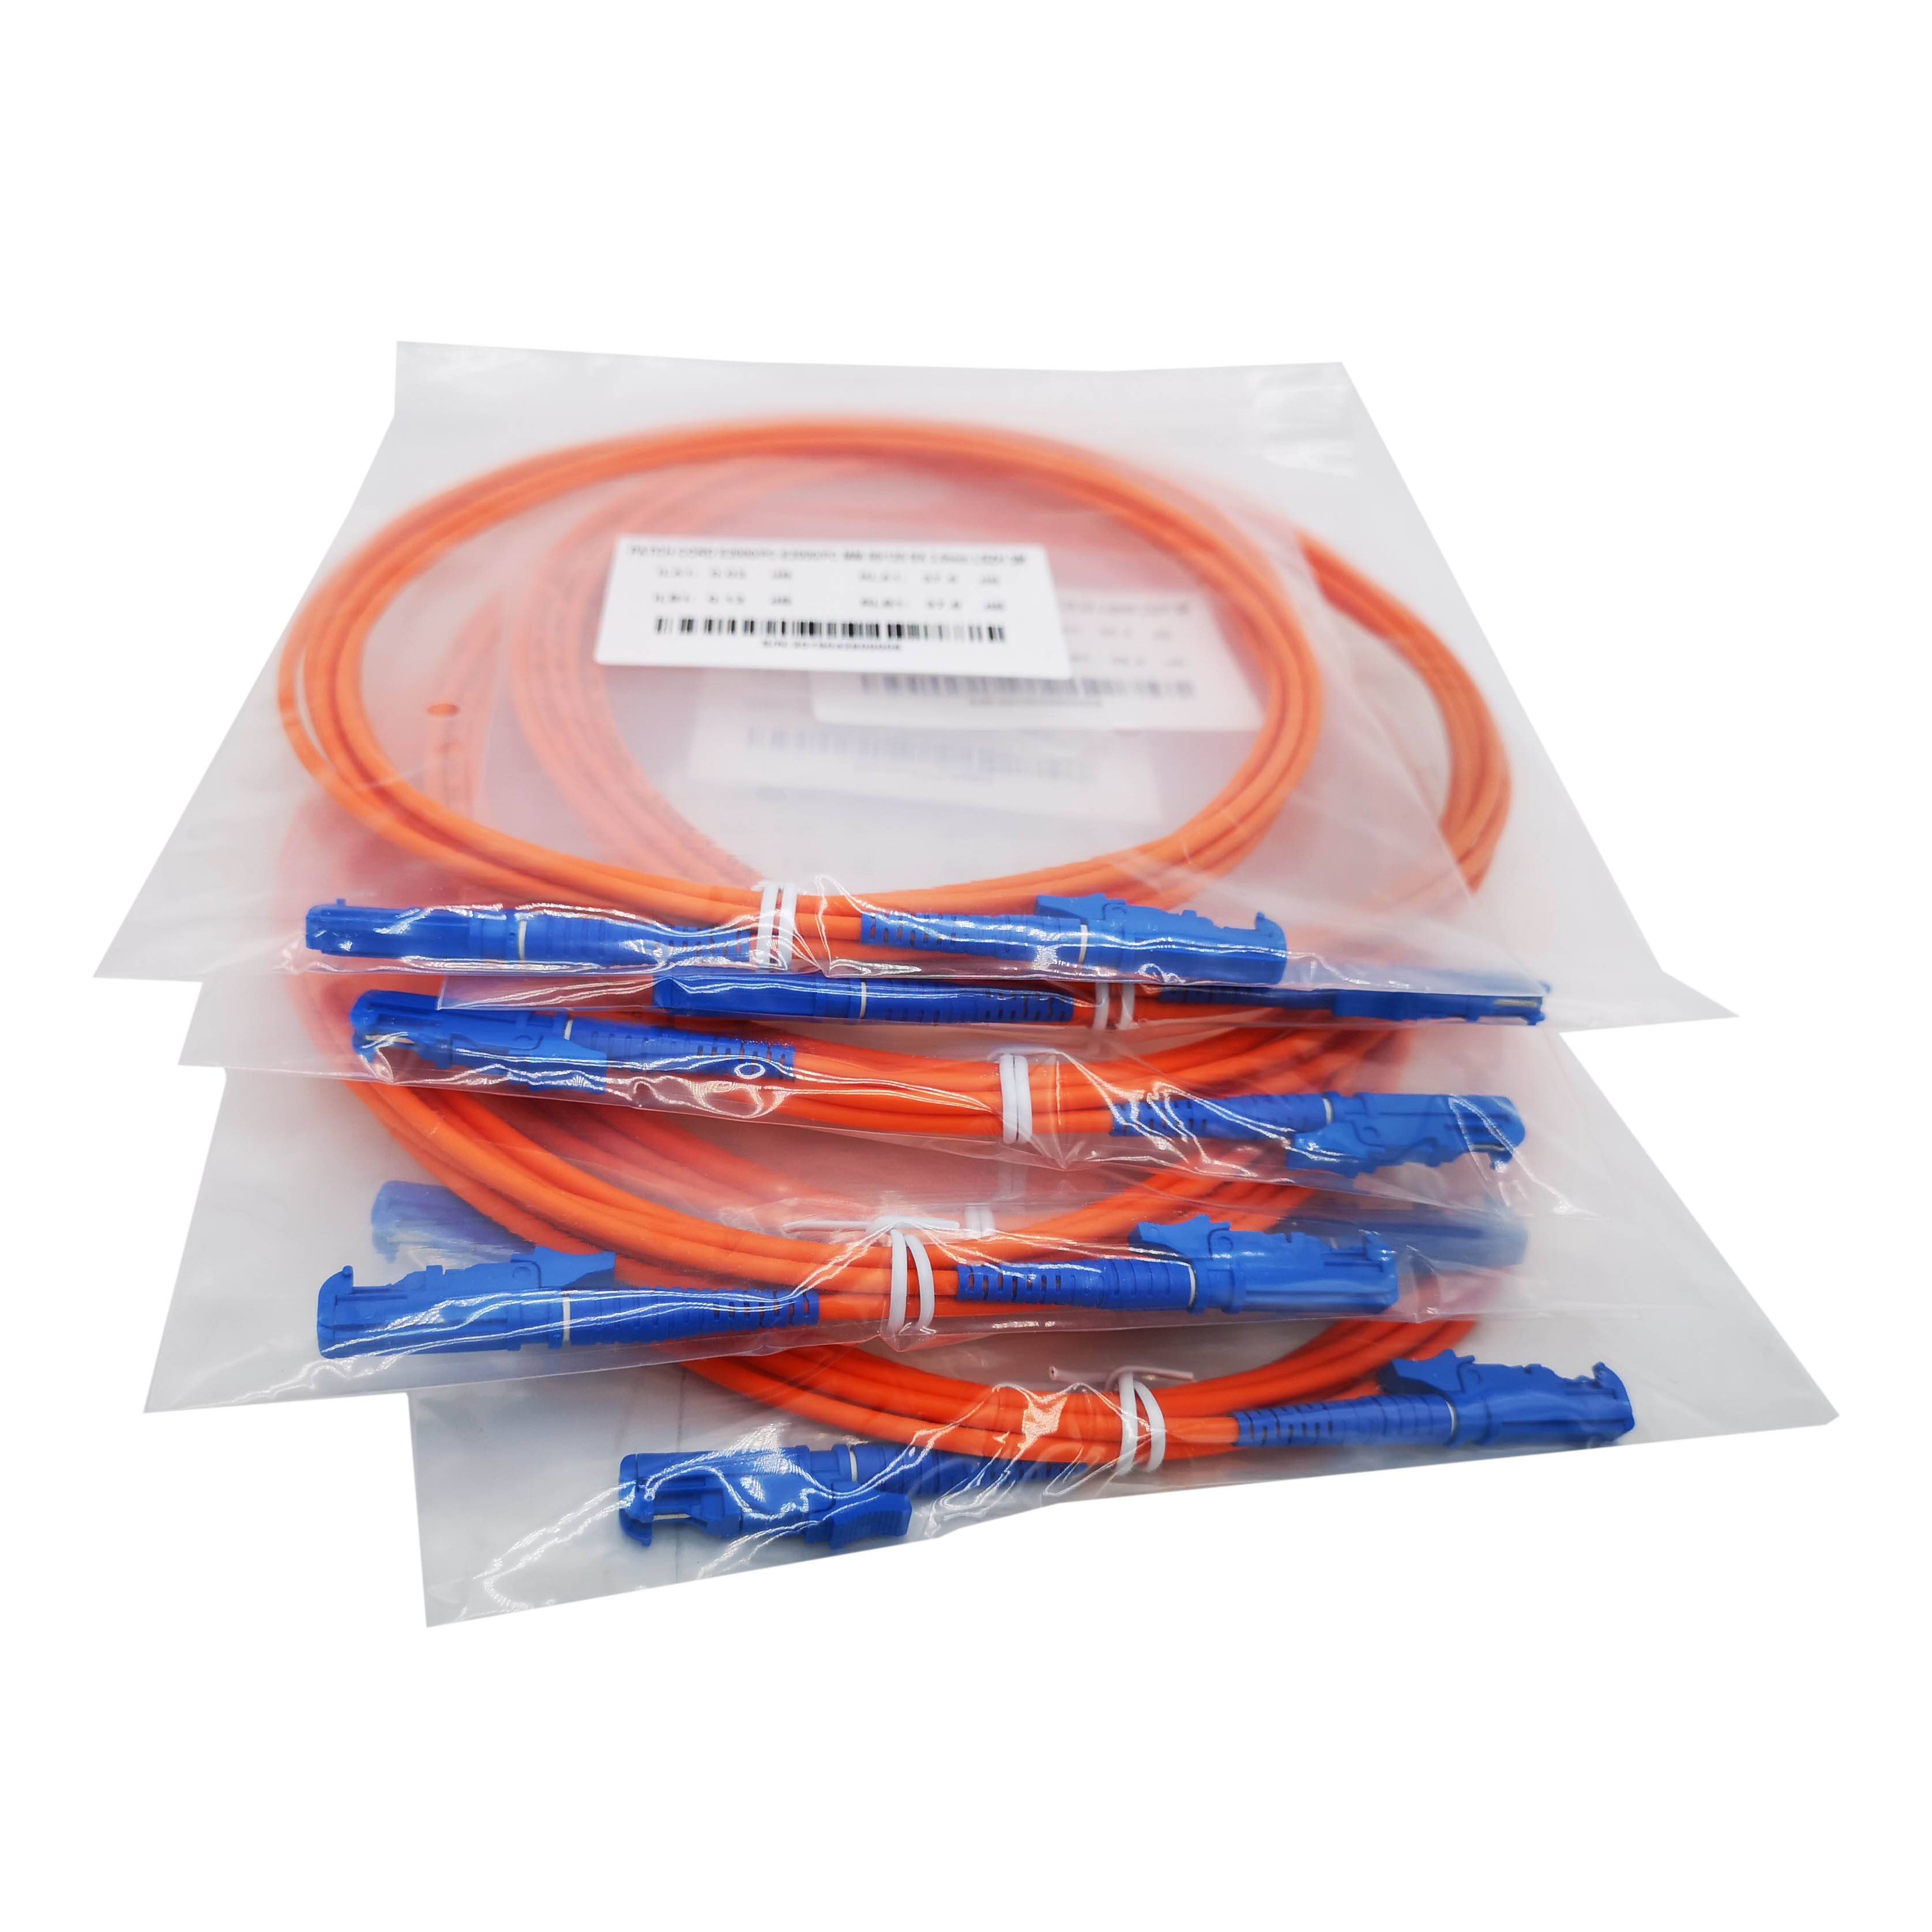 E2000 / APC UPC Fiber Optic Patch Cable 3 Meters / Fiber Optic Jumpers R&M,HUBER + SUHNER